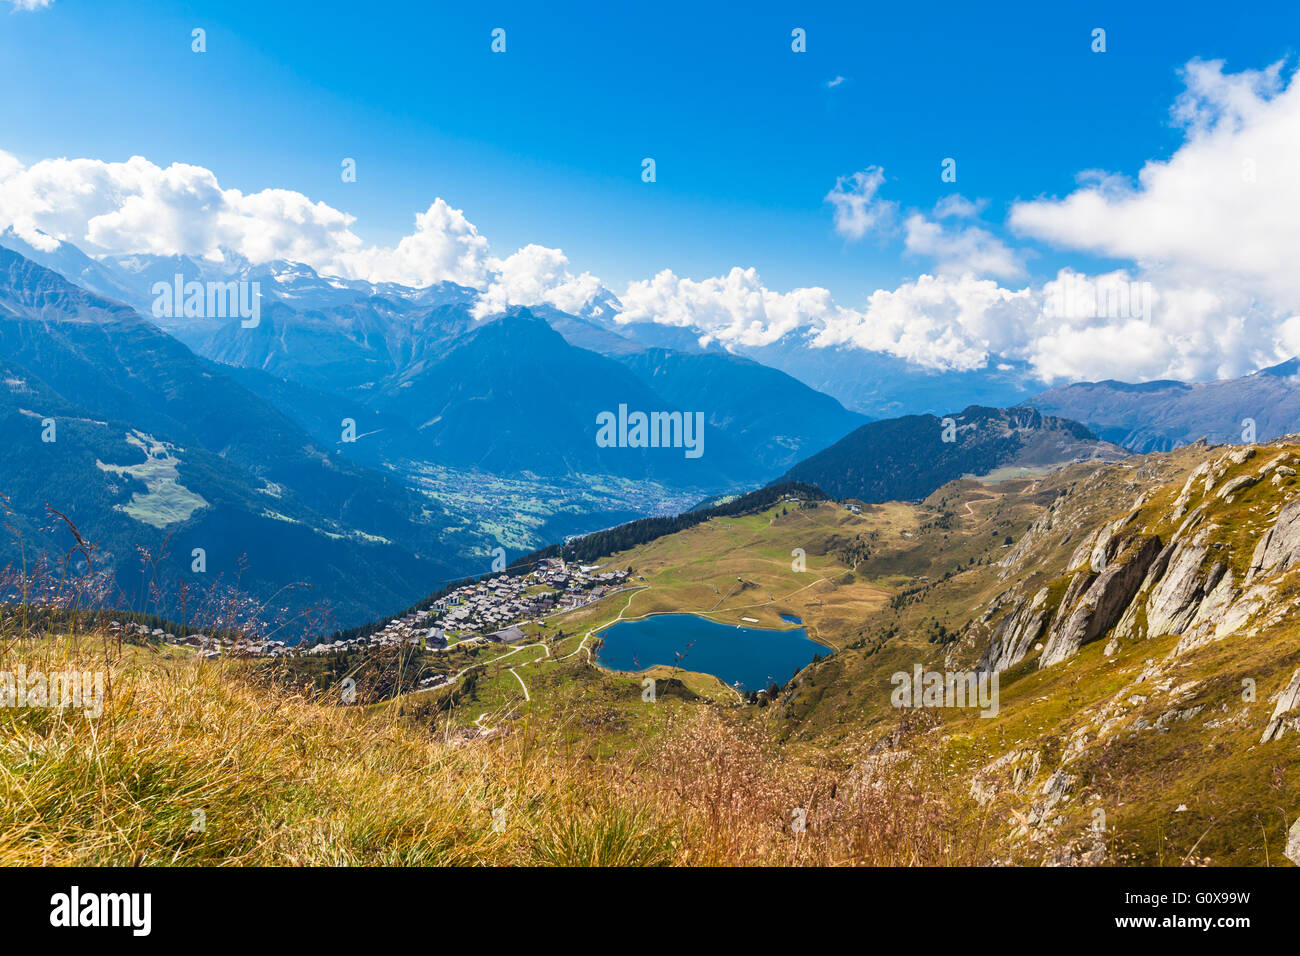 Aerial view of the Bettmersee (Lake) and the Bettmer town, with the numerous peaks of alps as background, in Valais, Switzerland Stock Photo